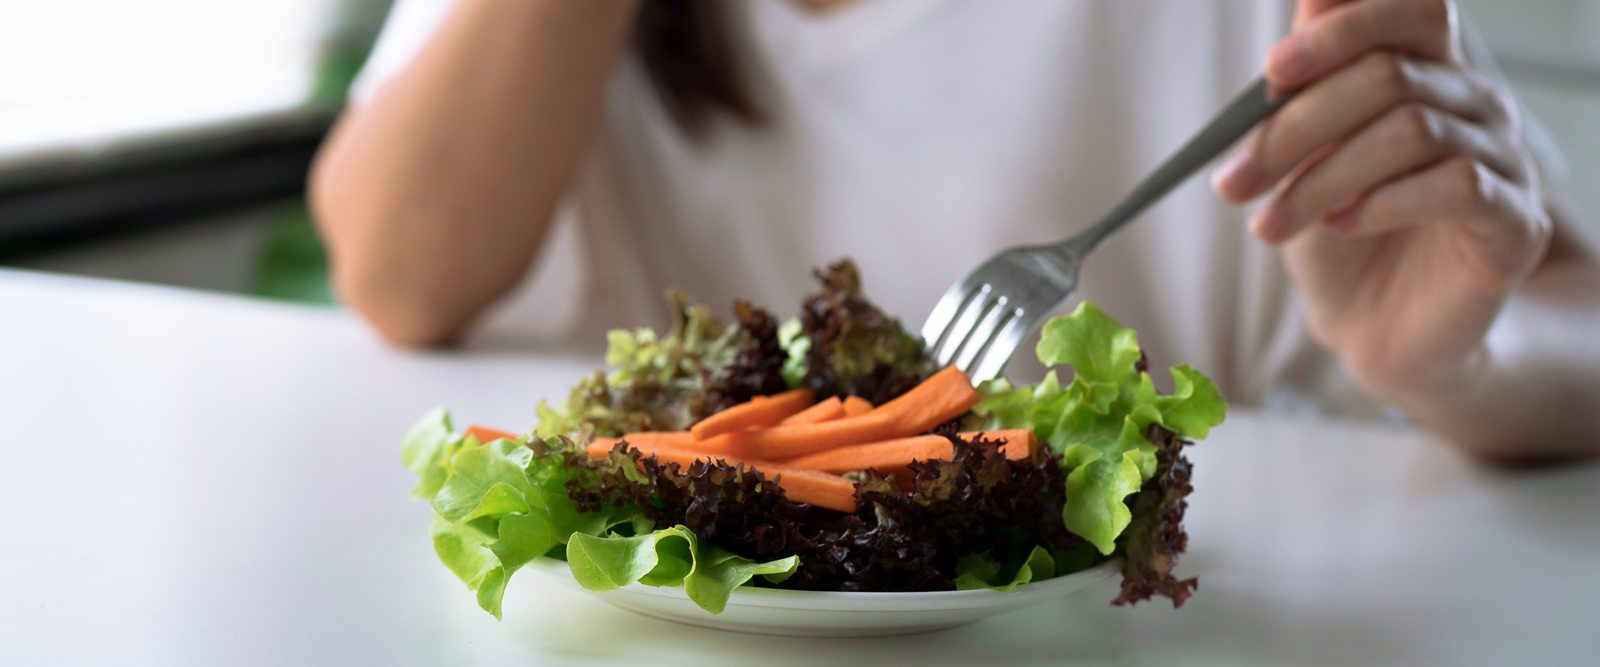 Woman with disordered eating picking at salad